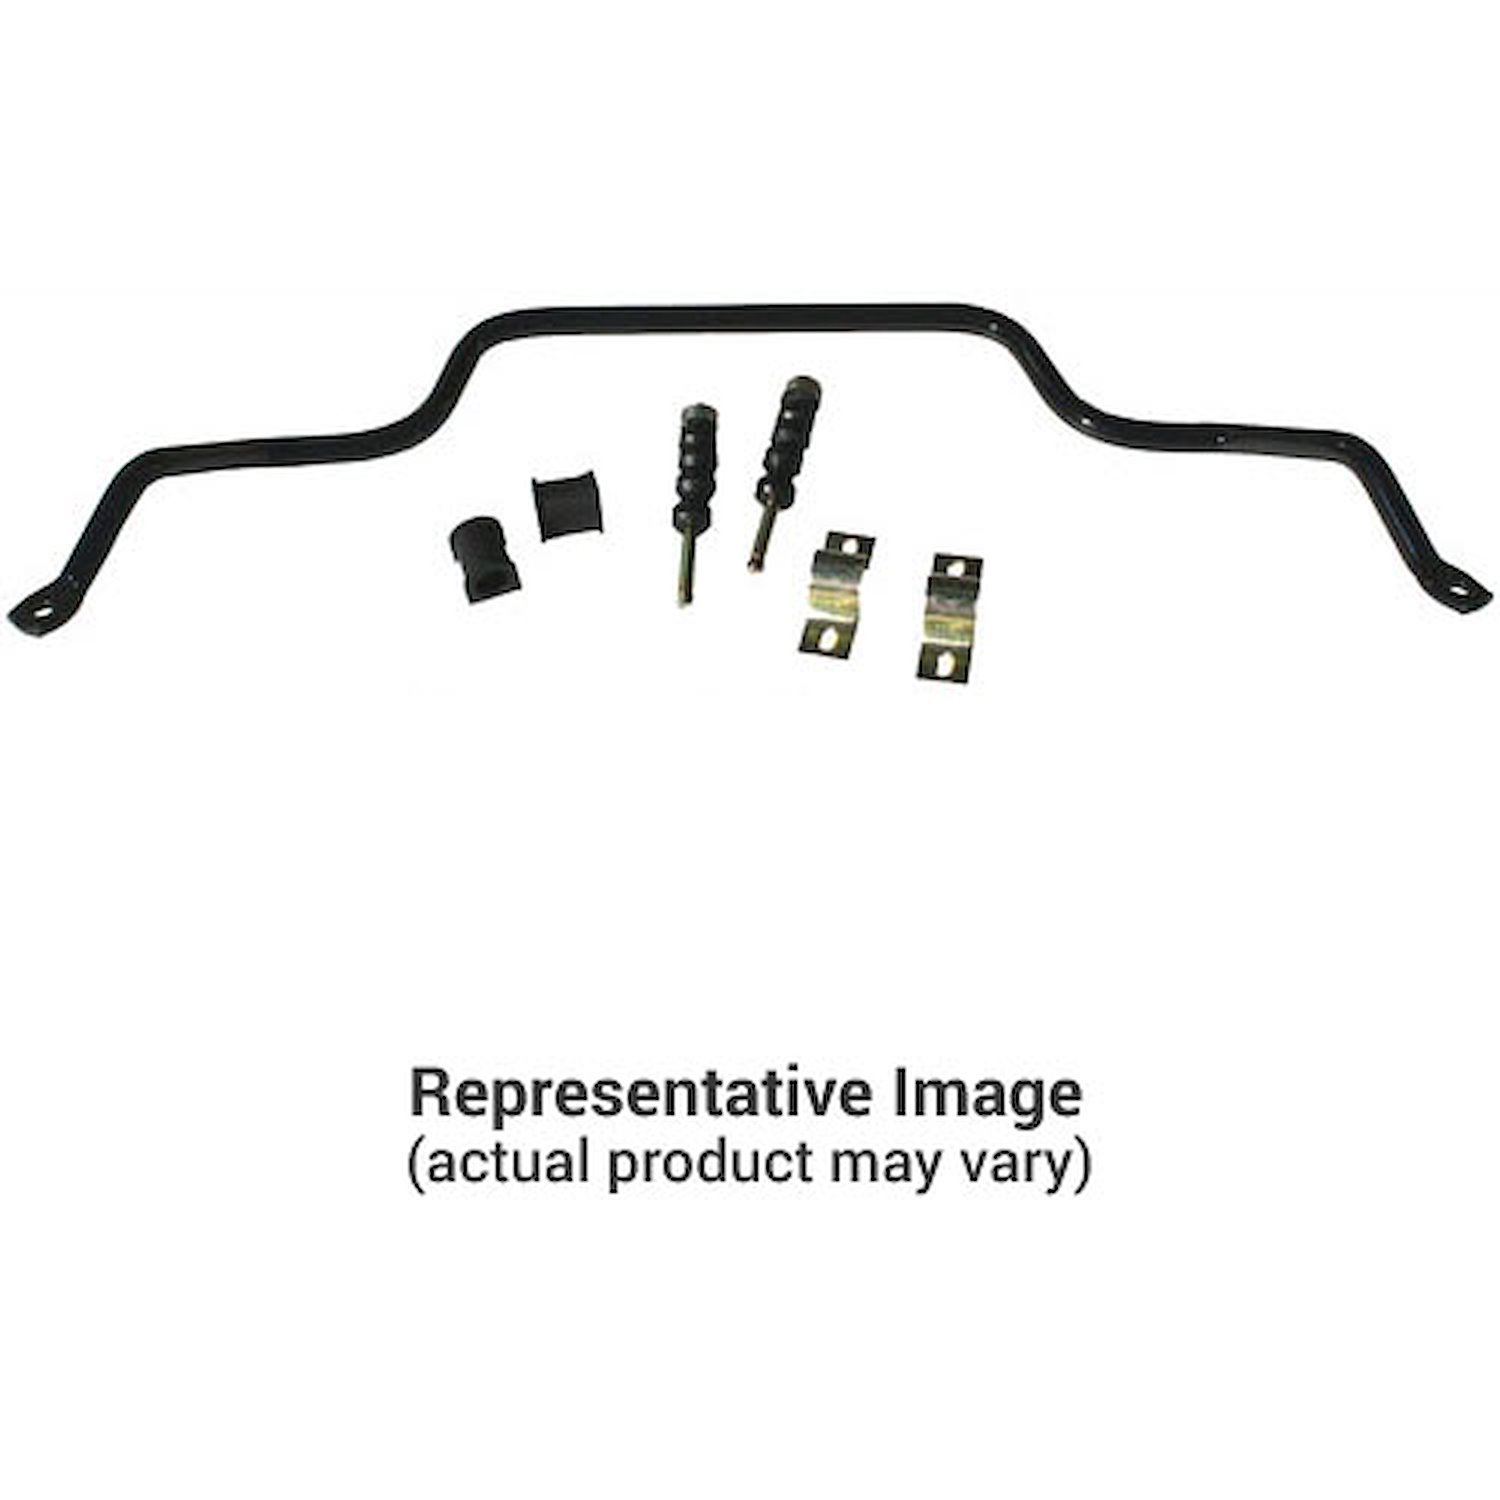 7/8" Rear Sway Bar 1998-10 New Beetle, Jetta, Golf (Up to 2" drop)